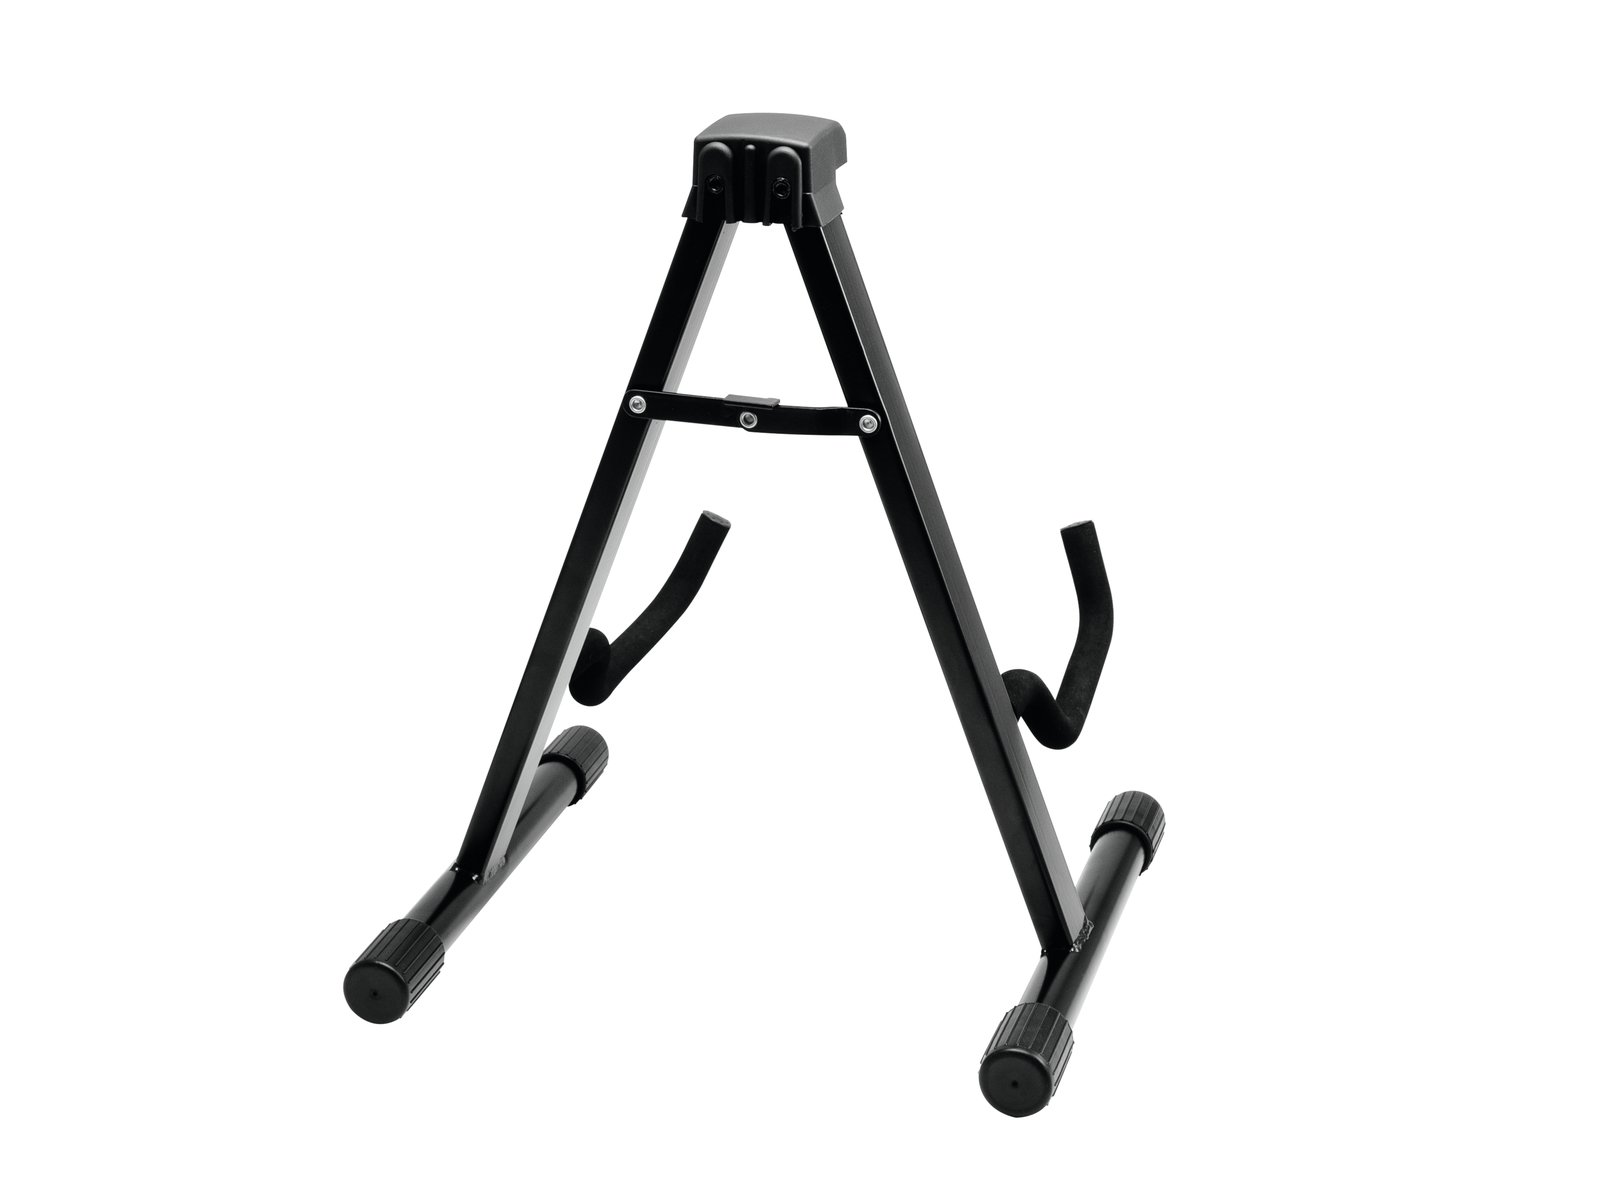 DIMAVERY Guitar Stand for Accoustic Guitar black